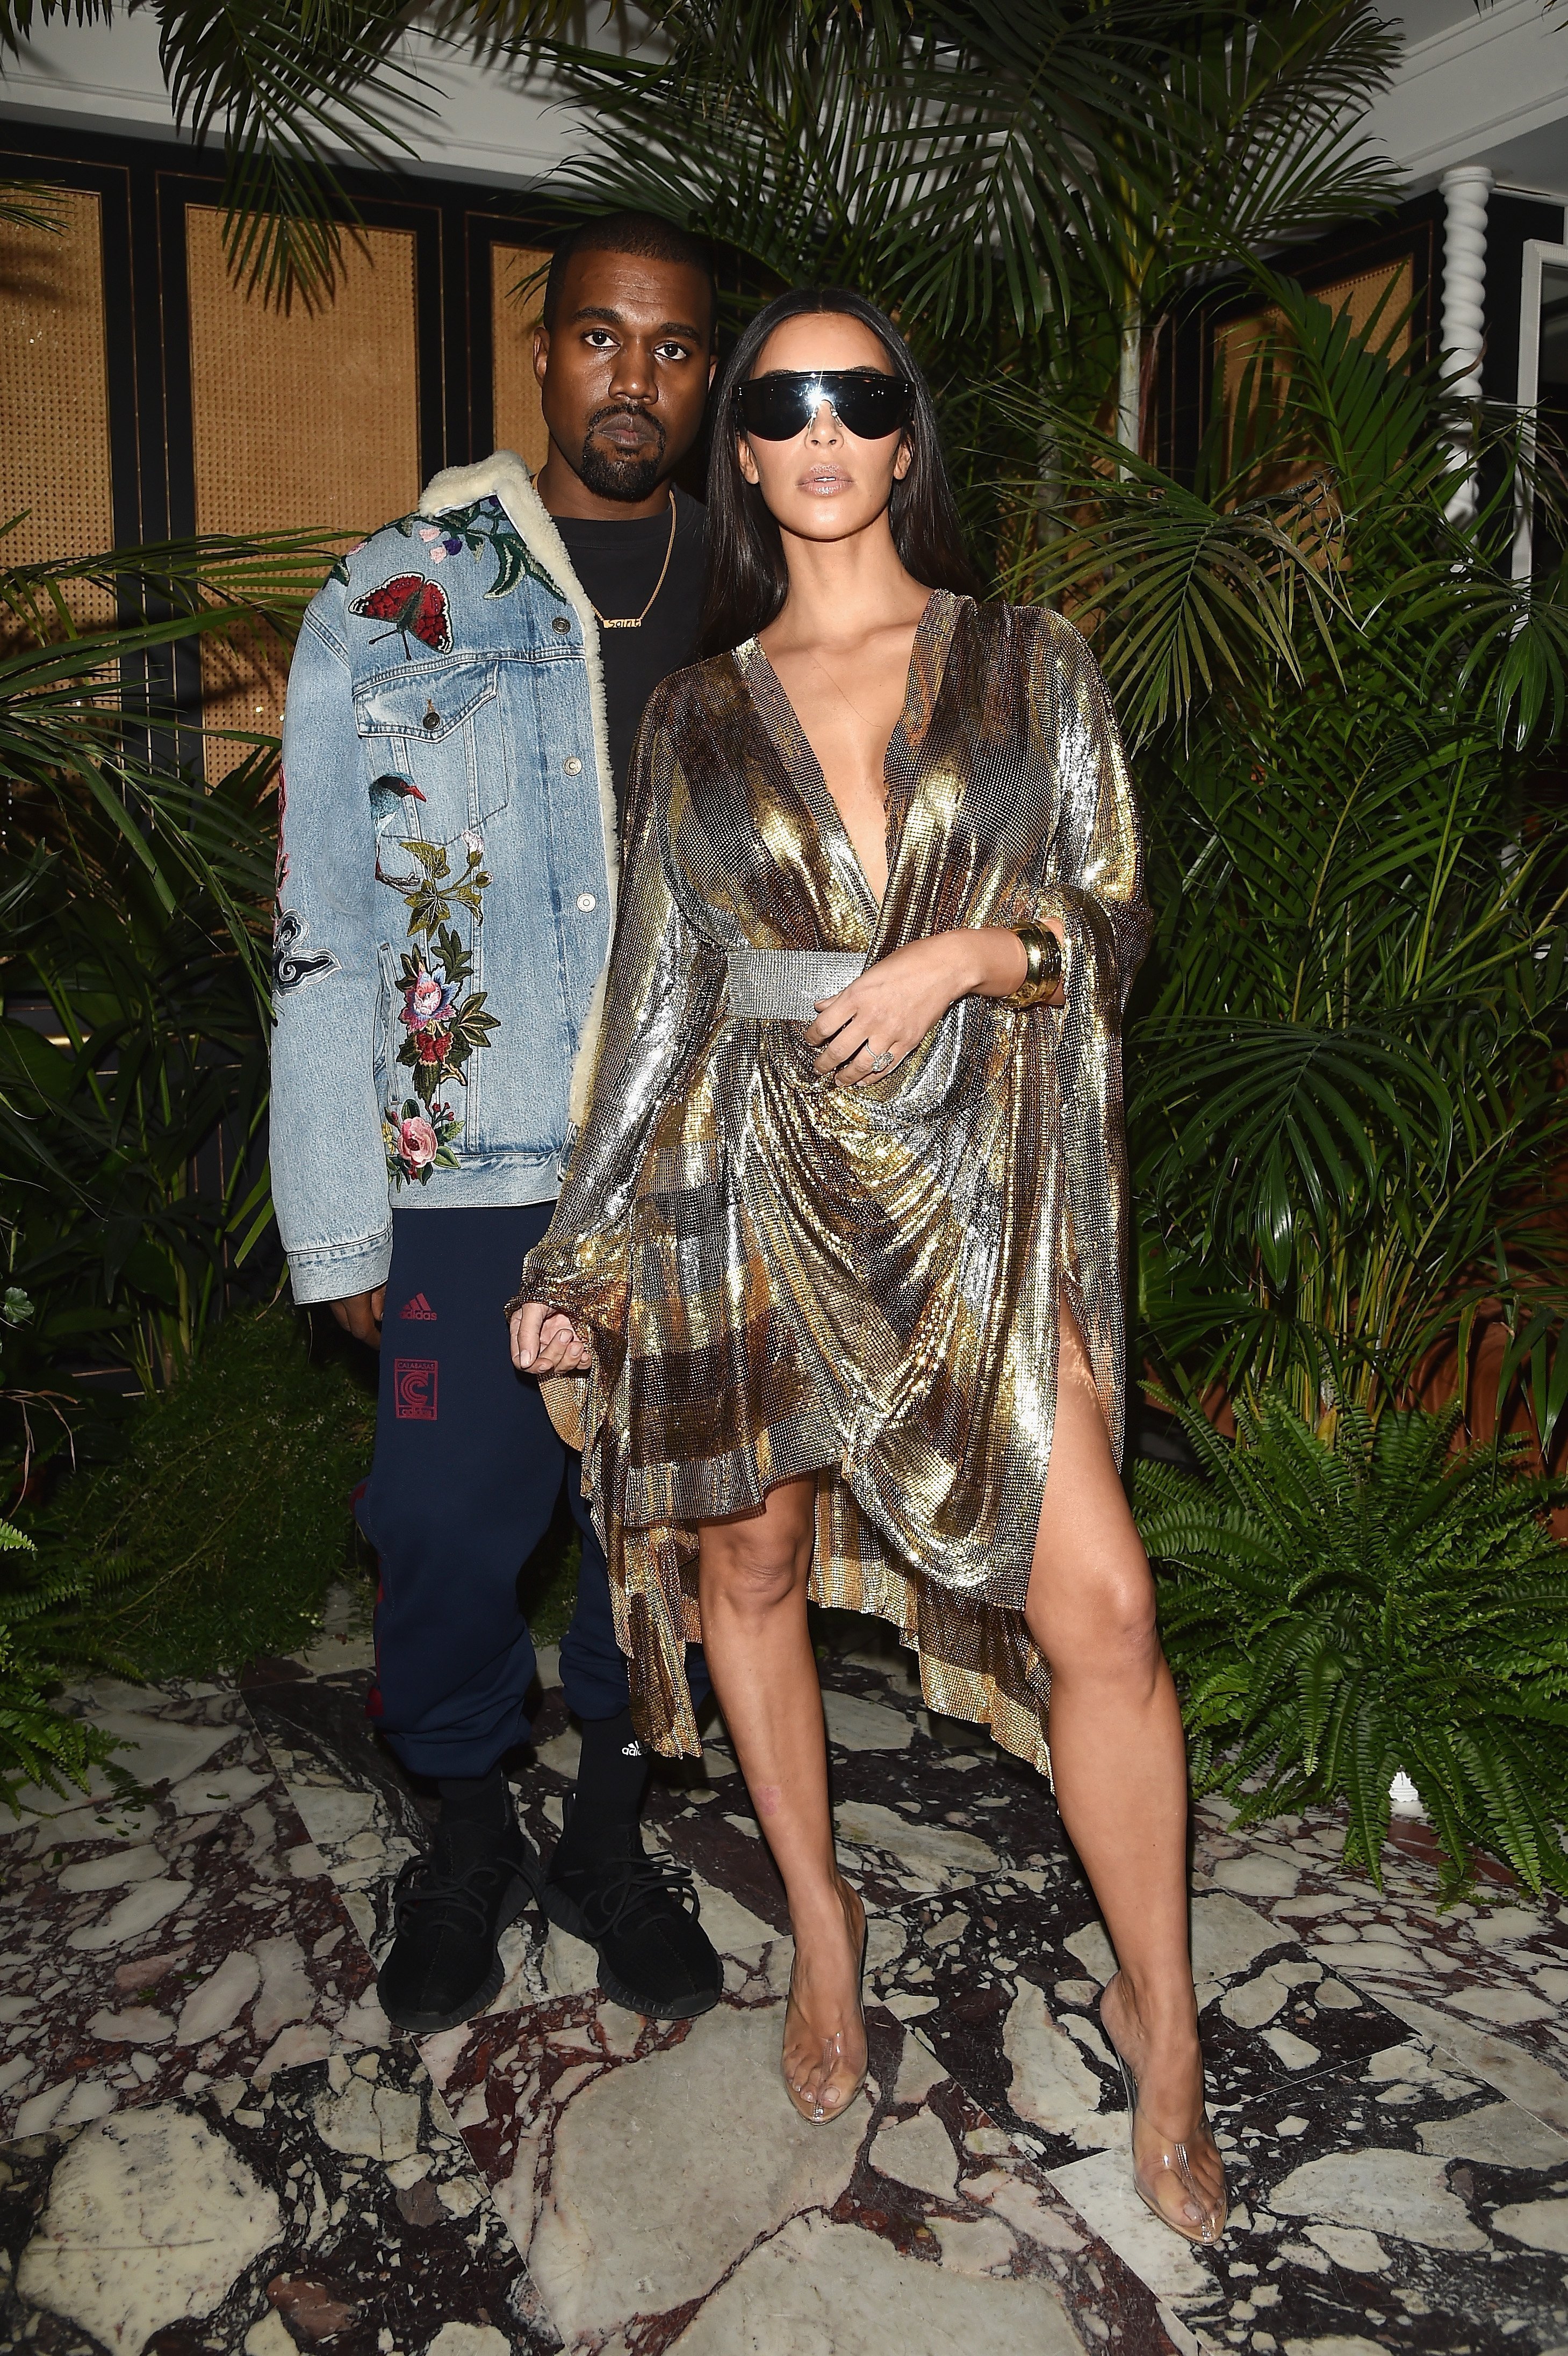 Kanye West & Kim Kardashian at the Balmain aftershow party as part of the Paris Fashion Week on Sept. 29, 2016. | Photo: Getty Images